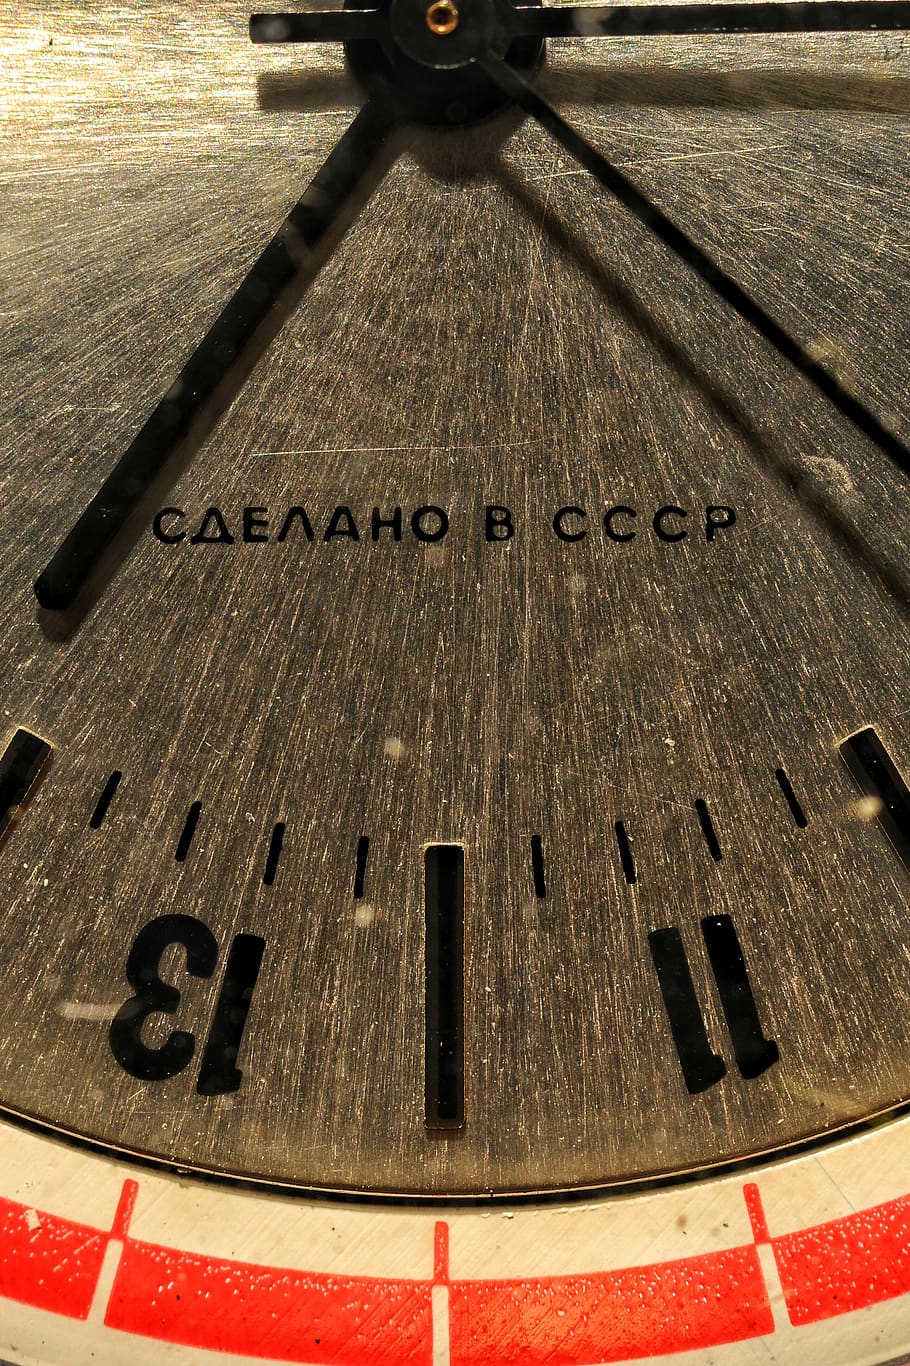 watch, russia, cccp, iron, texture, aluminum, time, lancets, timetable, vintage